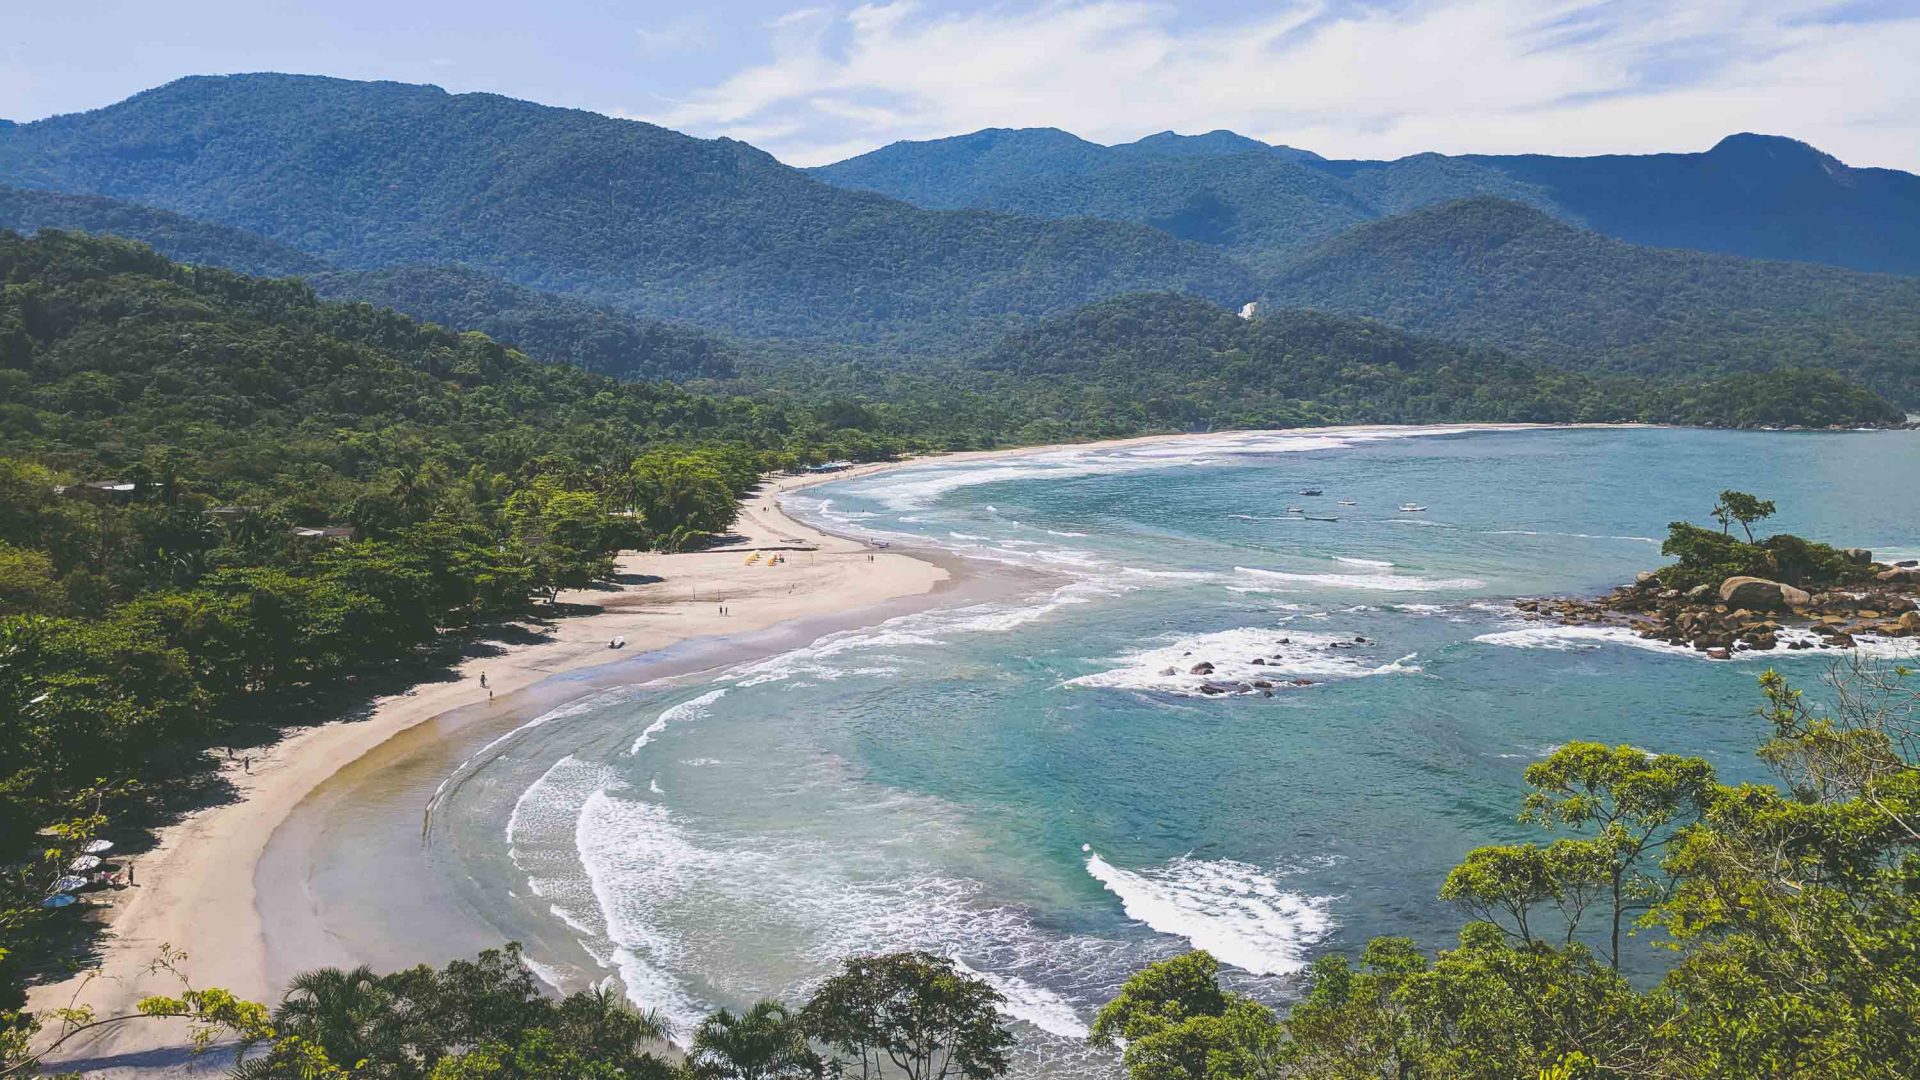 Into the ‘other’ Amazon, and the search for Brazil’s best beach